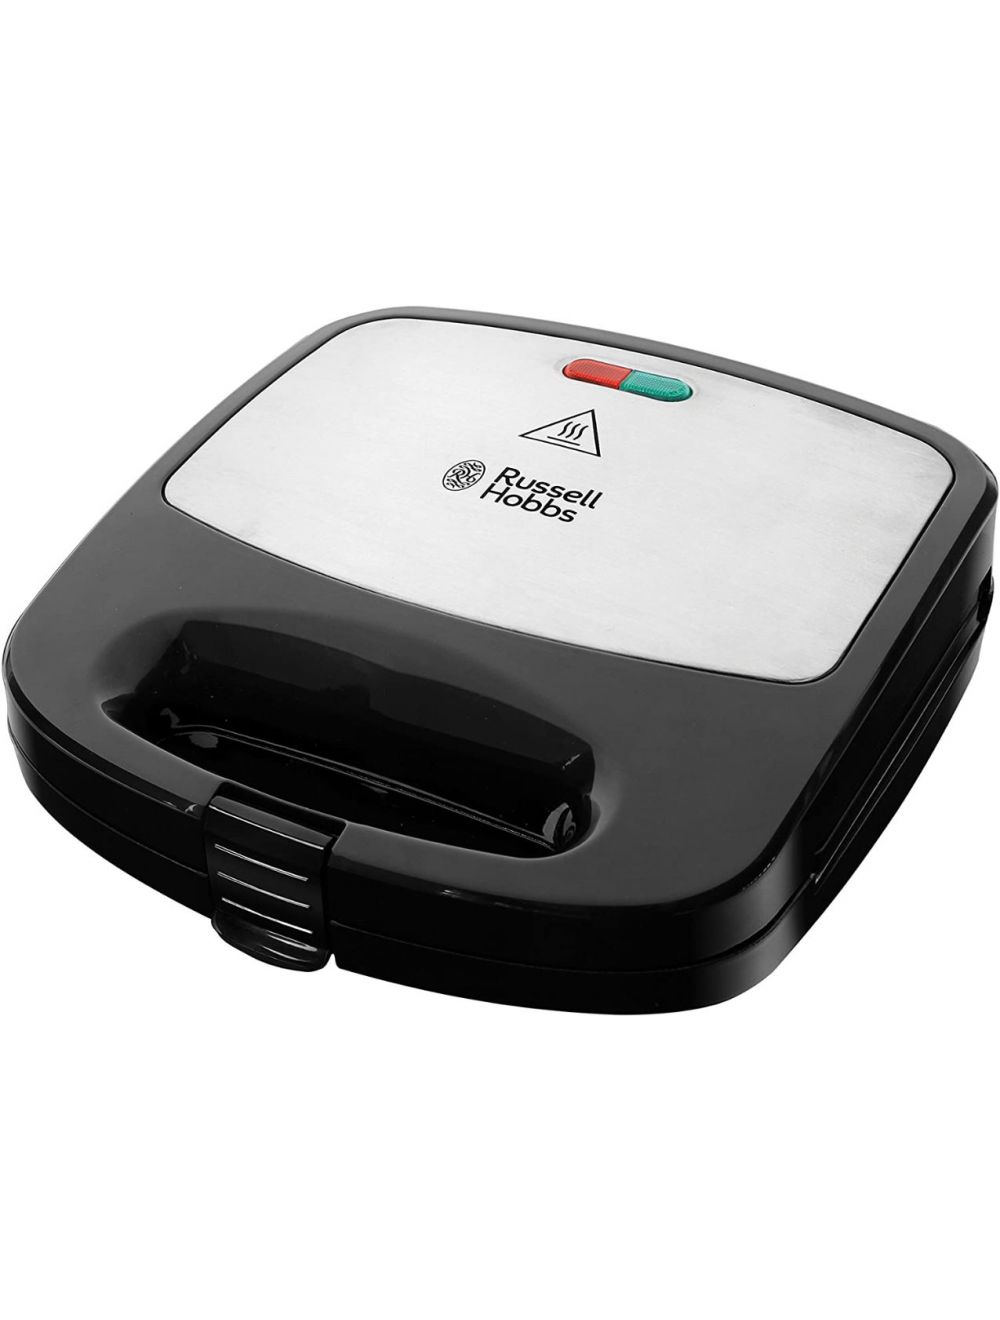 Russell Hobbs 3-In-1 Sandwich/Panini And Waffle Maker Black-24540